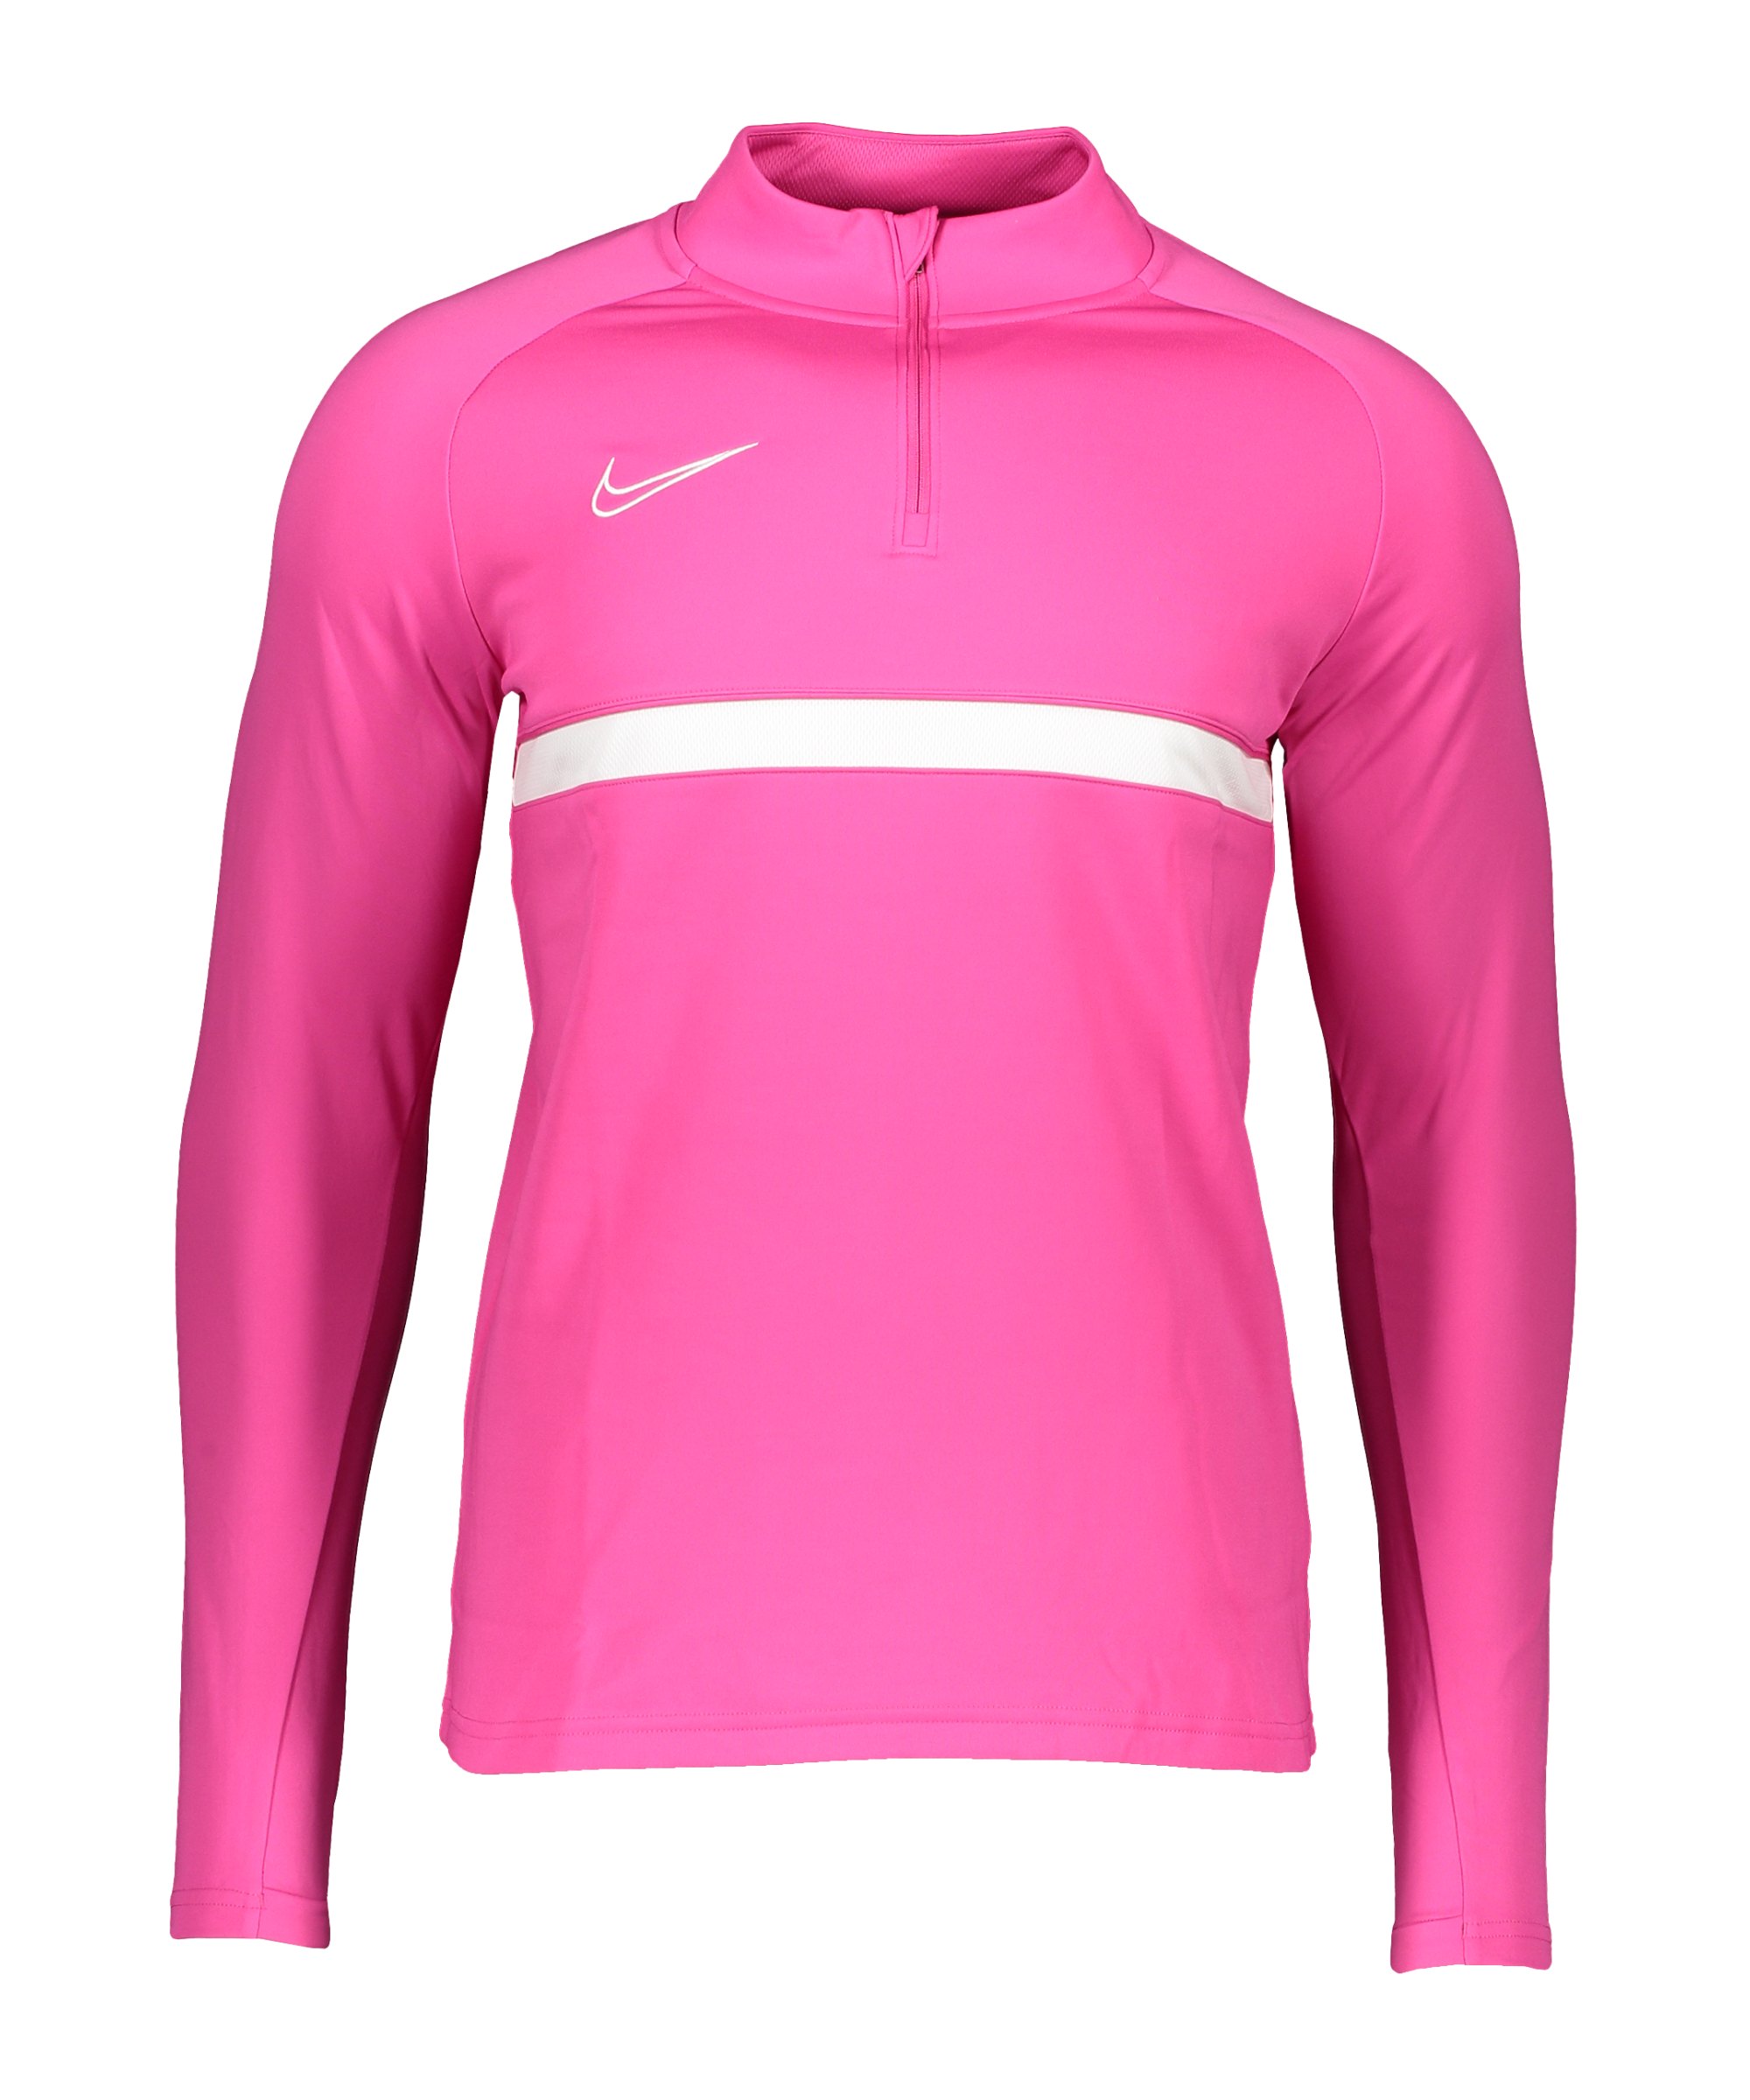 Nike Academy 21 Drill Top Pink Weiss F621 - pink